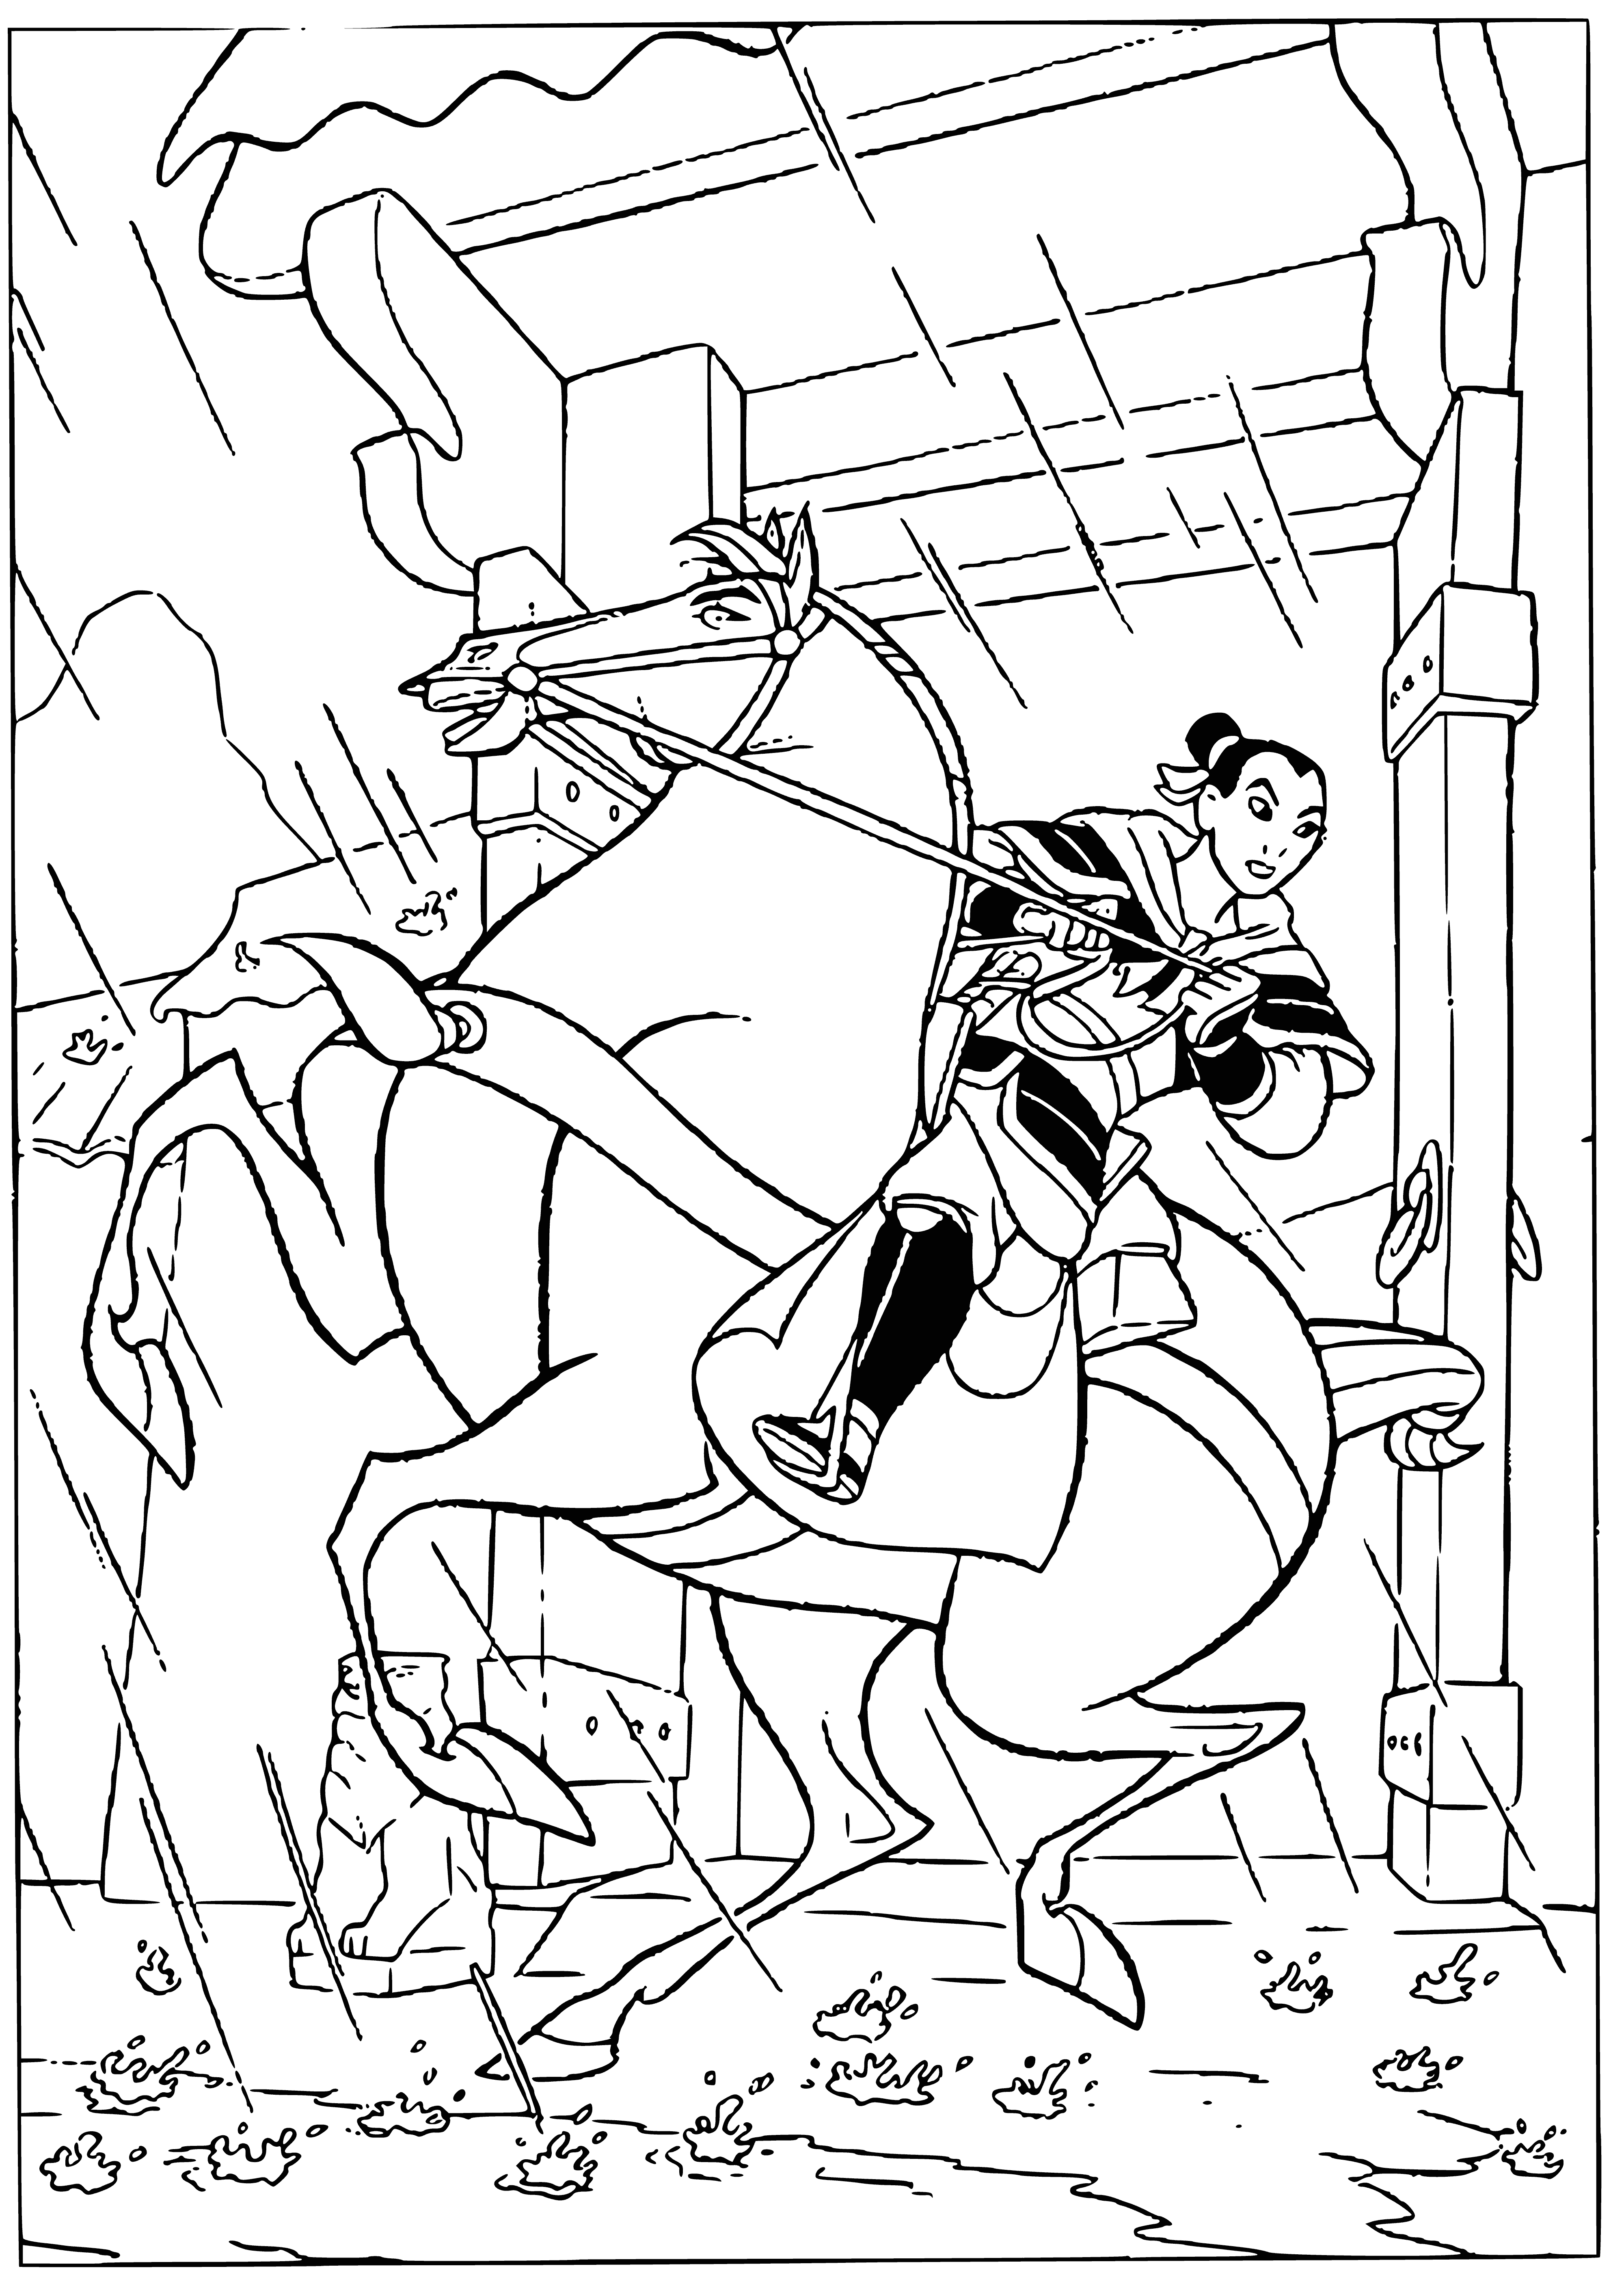 coloring page: Mulan rides a horse, wielding a sword with determination, surrounded by men fighting in a chaotic battlefield. #legendofmulan